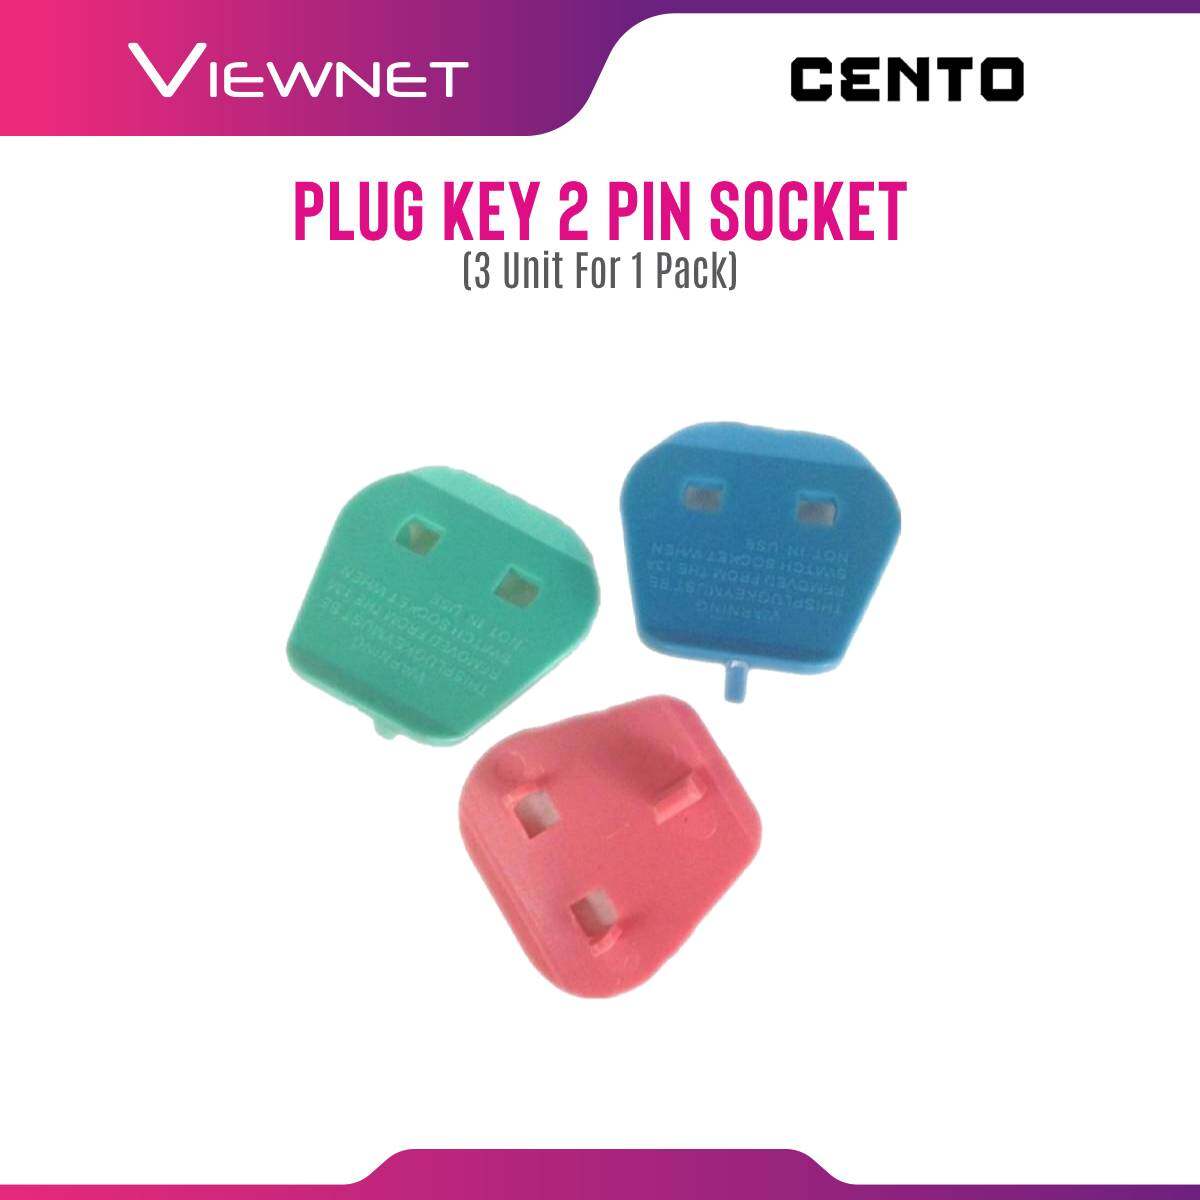 ( 3 Pcs For 1 Pack) Cento Safety Plug Key 2 Pin Plastic Adapter Converter Random color